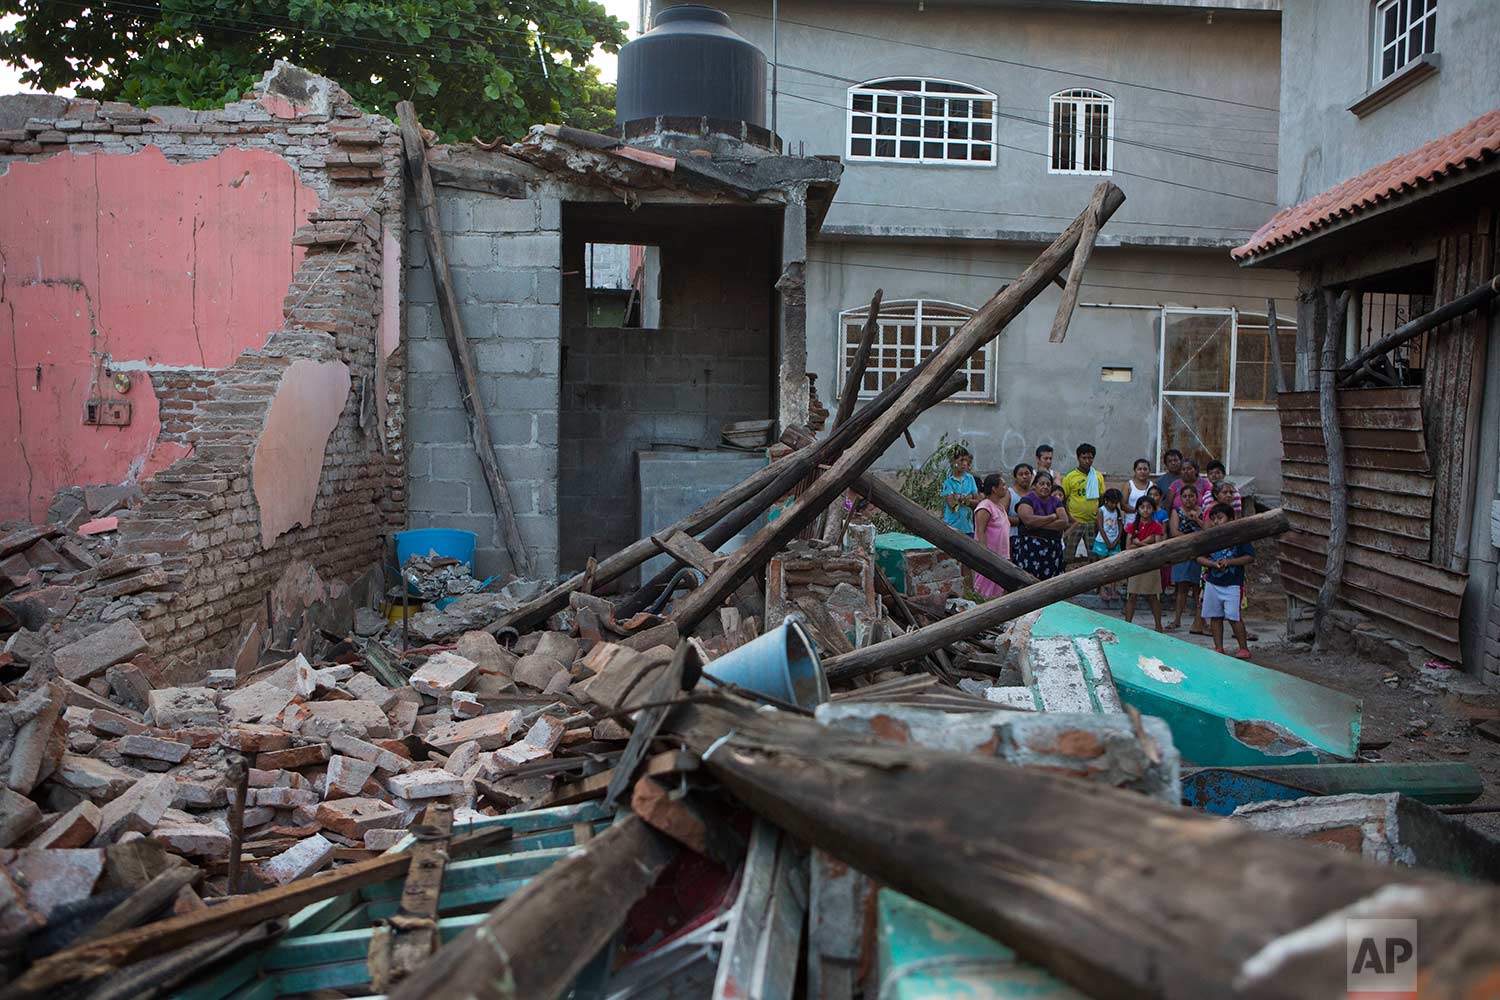  Neighbors look at a home destroyed by a massive earthquake, in Juchitan, Oaxaca state, Mexico, Saturday, Sept. 9, 2017. The 8.1 quake off the southern Pacific coast just before midnight Thursday toppled hundreds of buildings in several states. Harde